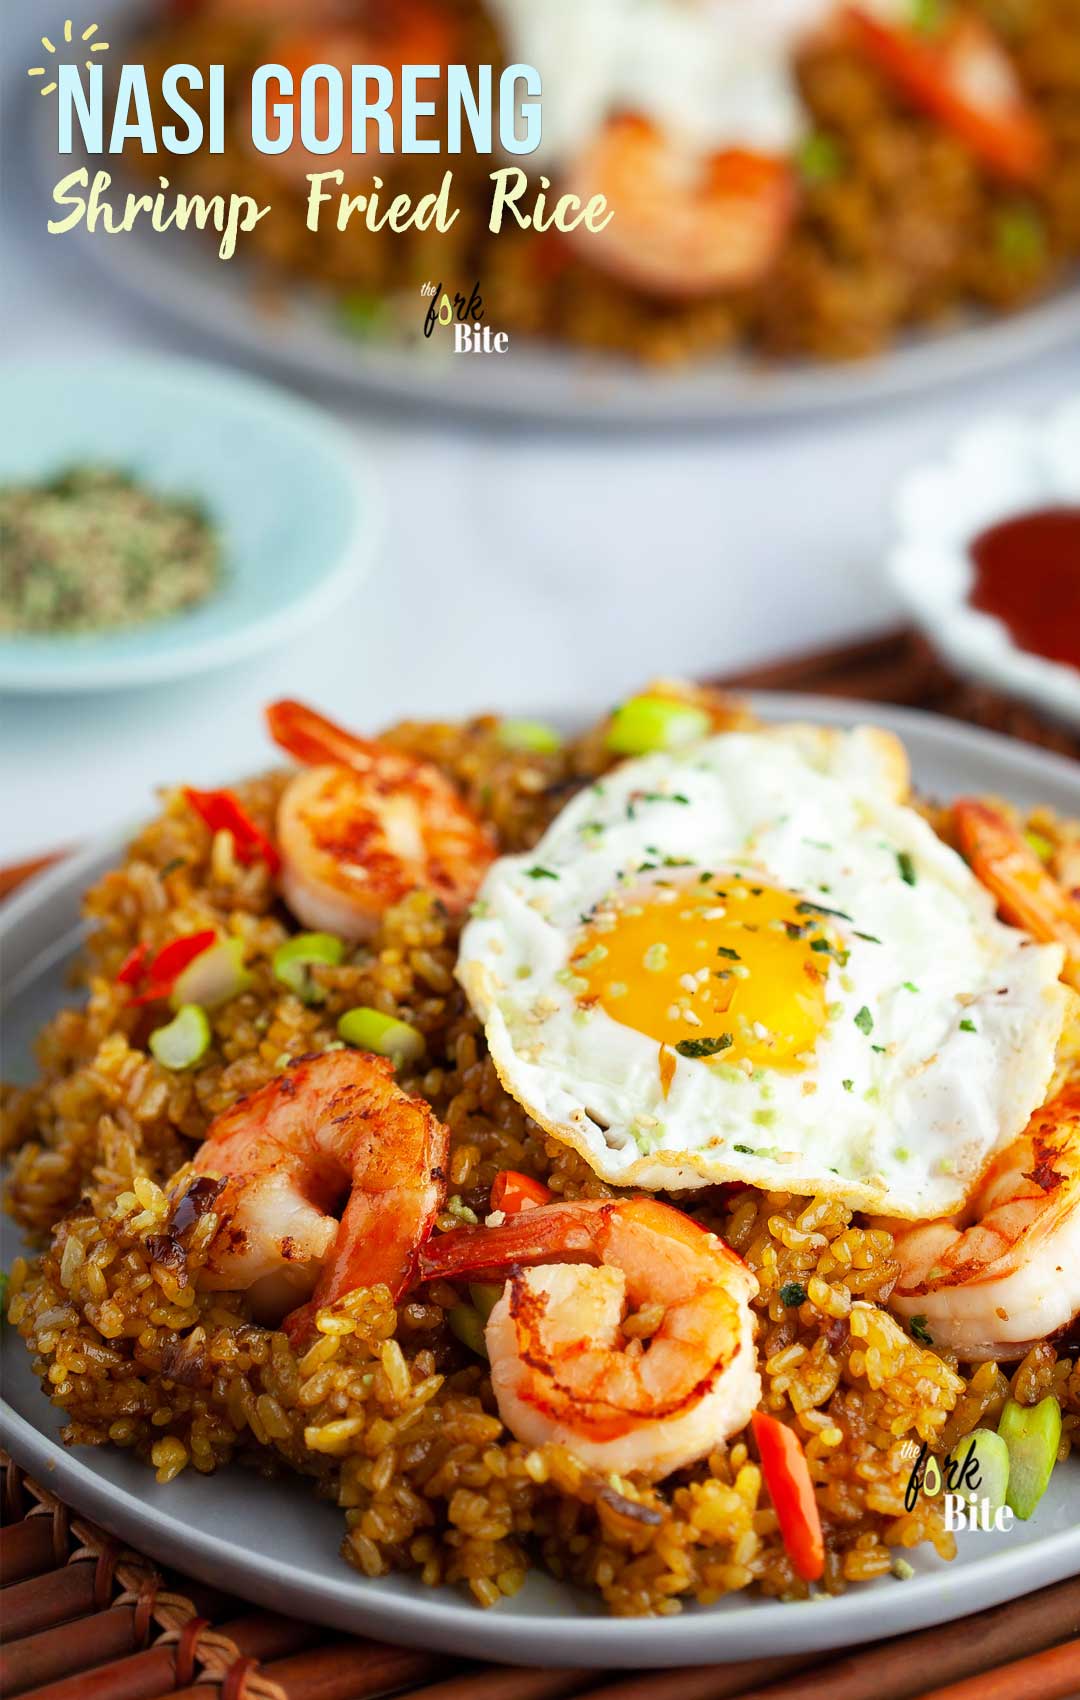 This Nasi Goreng or Indonesian fried rice with shrimp is one of my favorite fried rice recipes that packs a punch of sweet, spicy and savory flavors your family will love. Great use for leftover rice and ready in 15 minutes.